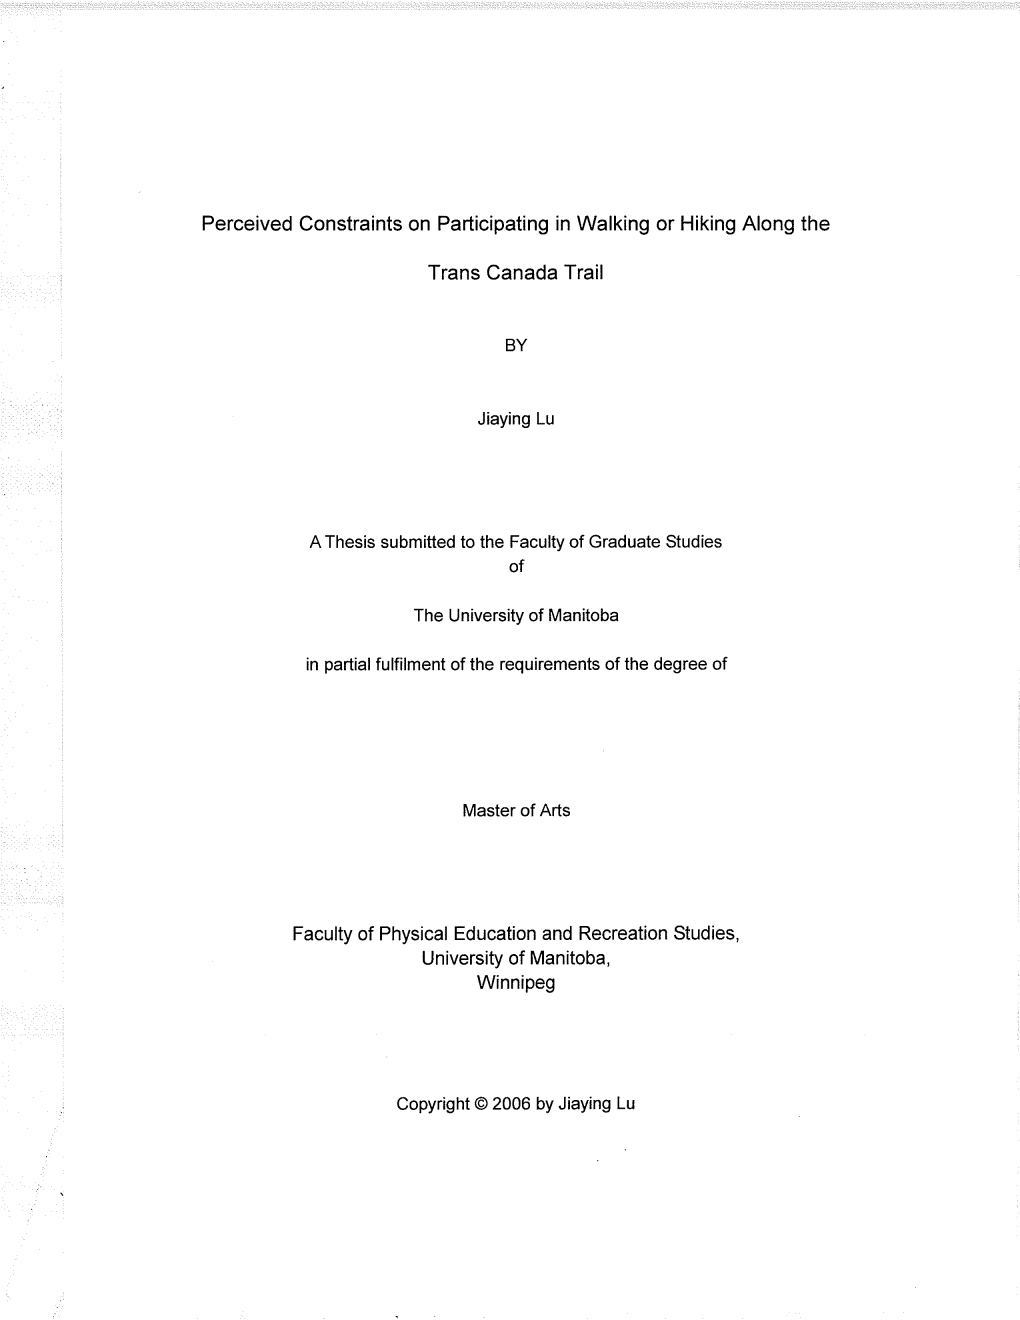 Perceived Constraints on Participating in Walking Or Hiking Along The